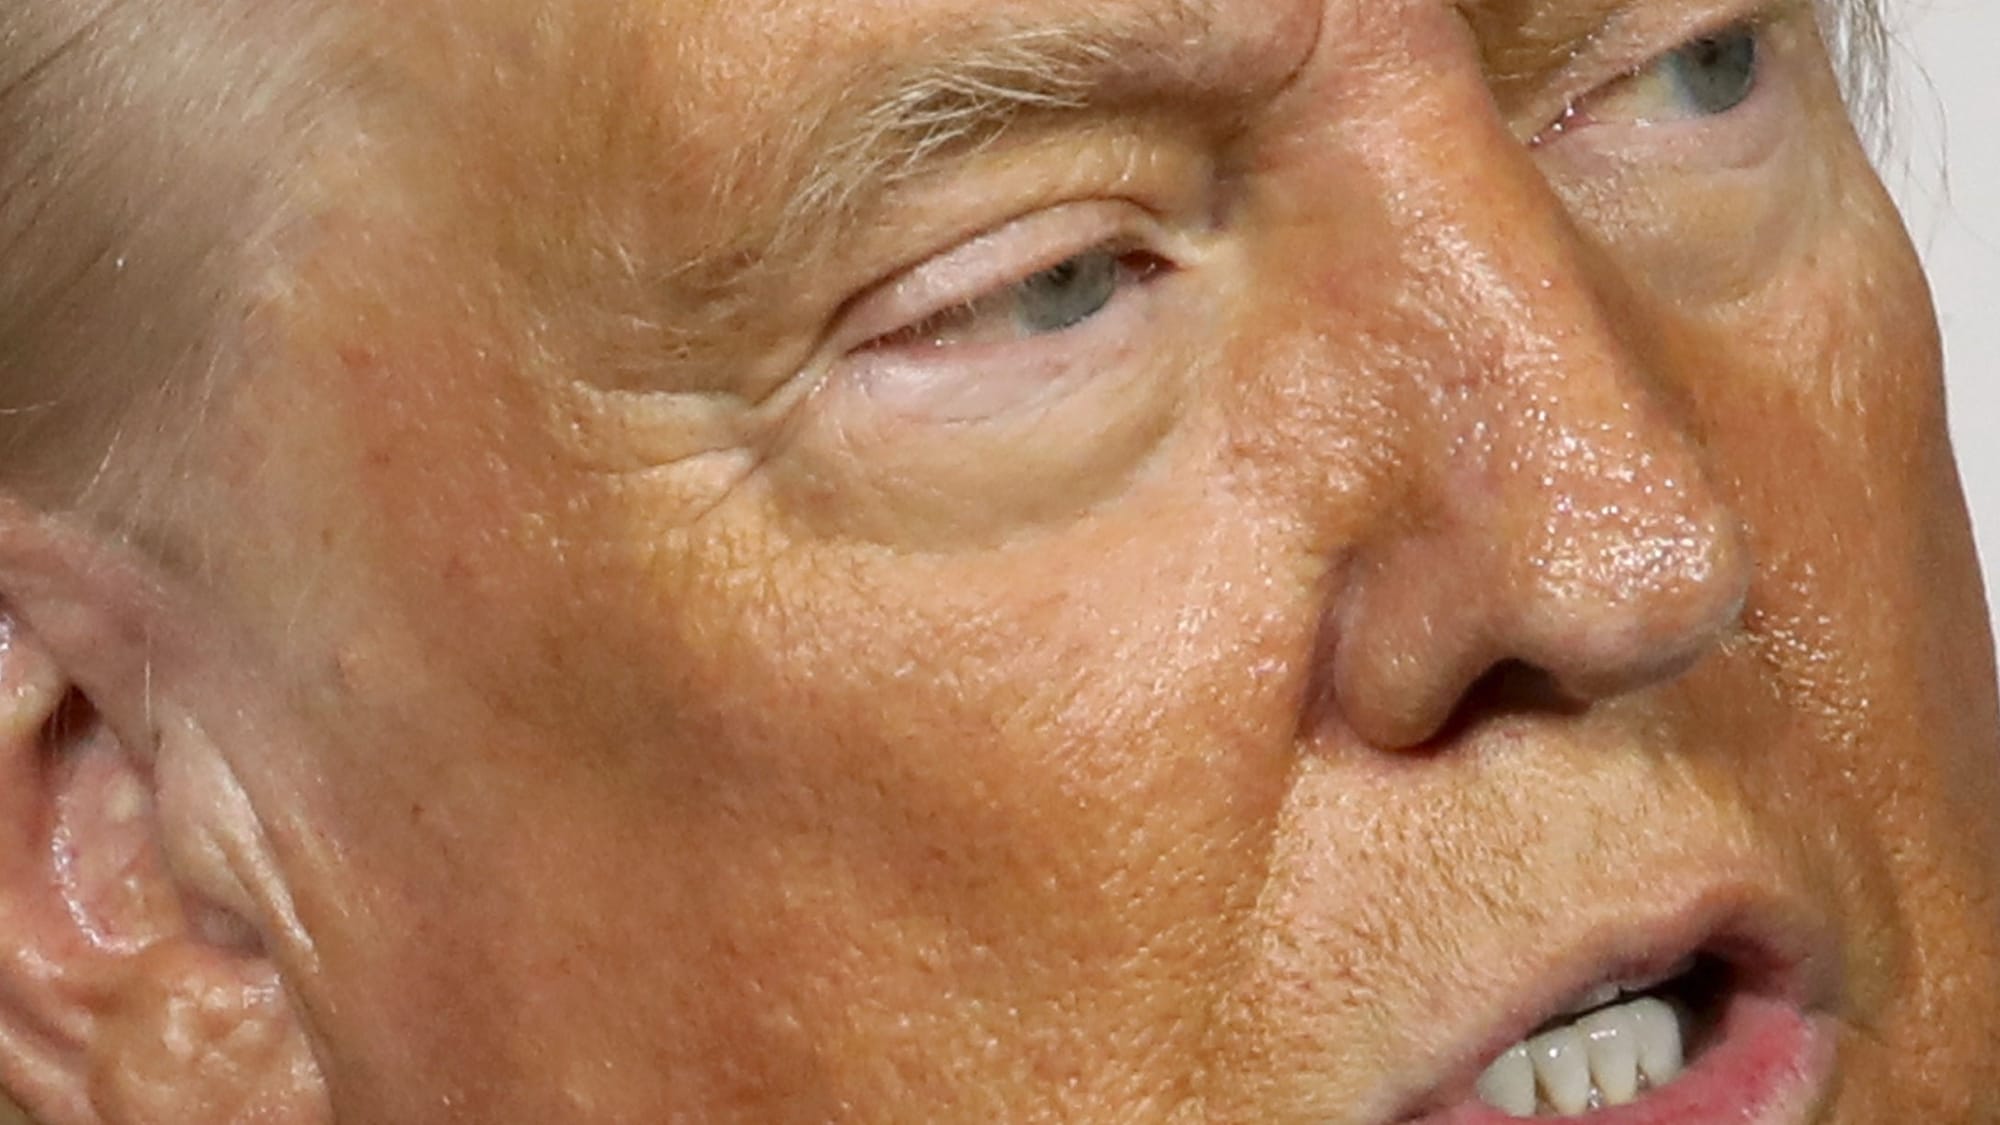 Donald Trump, multicolored, shiny, very close up face, speaking at a rally in Arizona